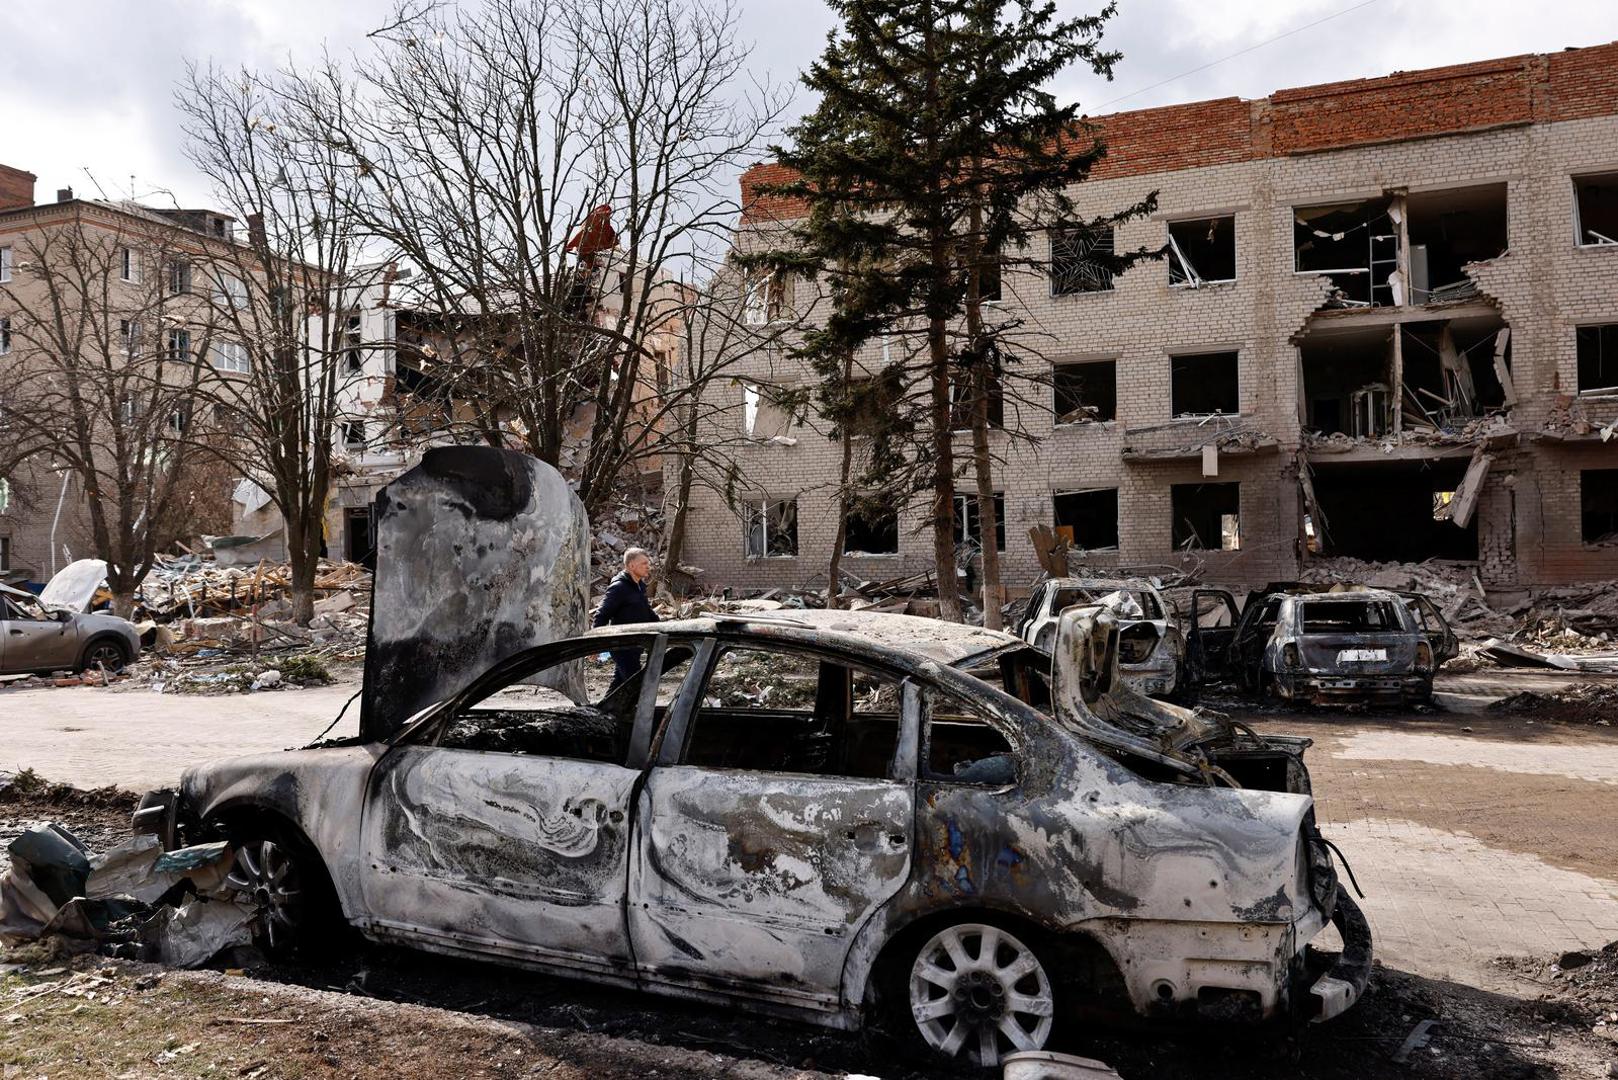 A person walks next to a damaged car in the aftermath of deadly shelling of an army office building, amid Russia's attack, in Sloviansk, Ukraine, March 27, 2023. REUTERS/Violeta Santos Moura Photo: VIOLETA SANTOS MOURA/REUTERS